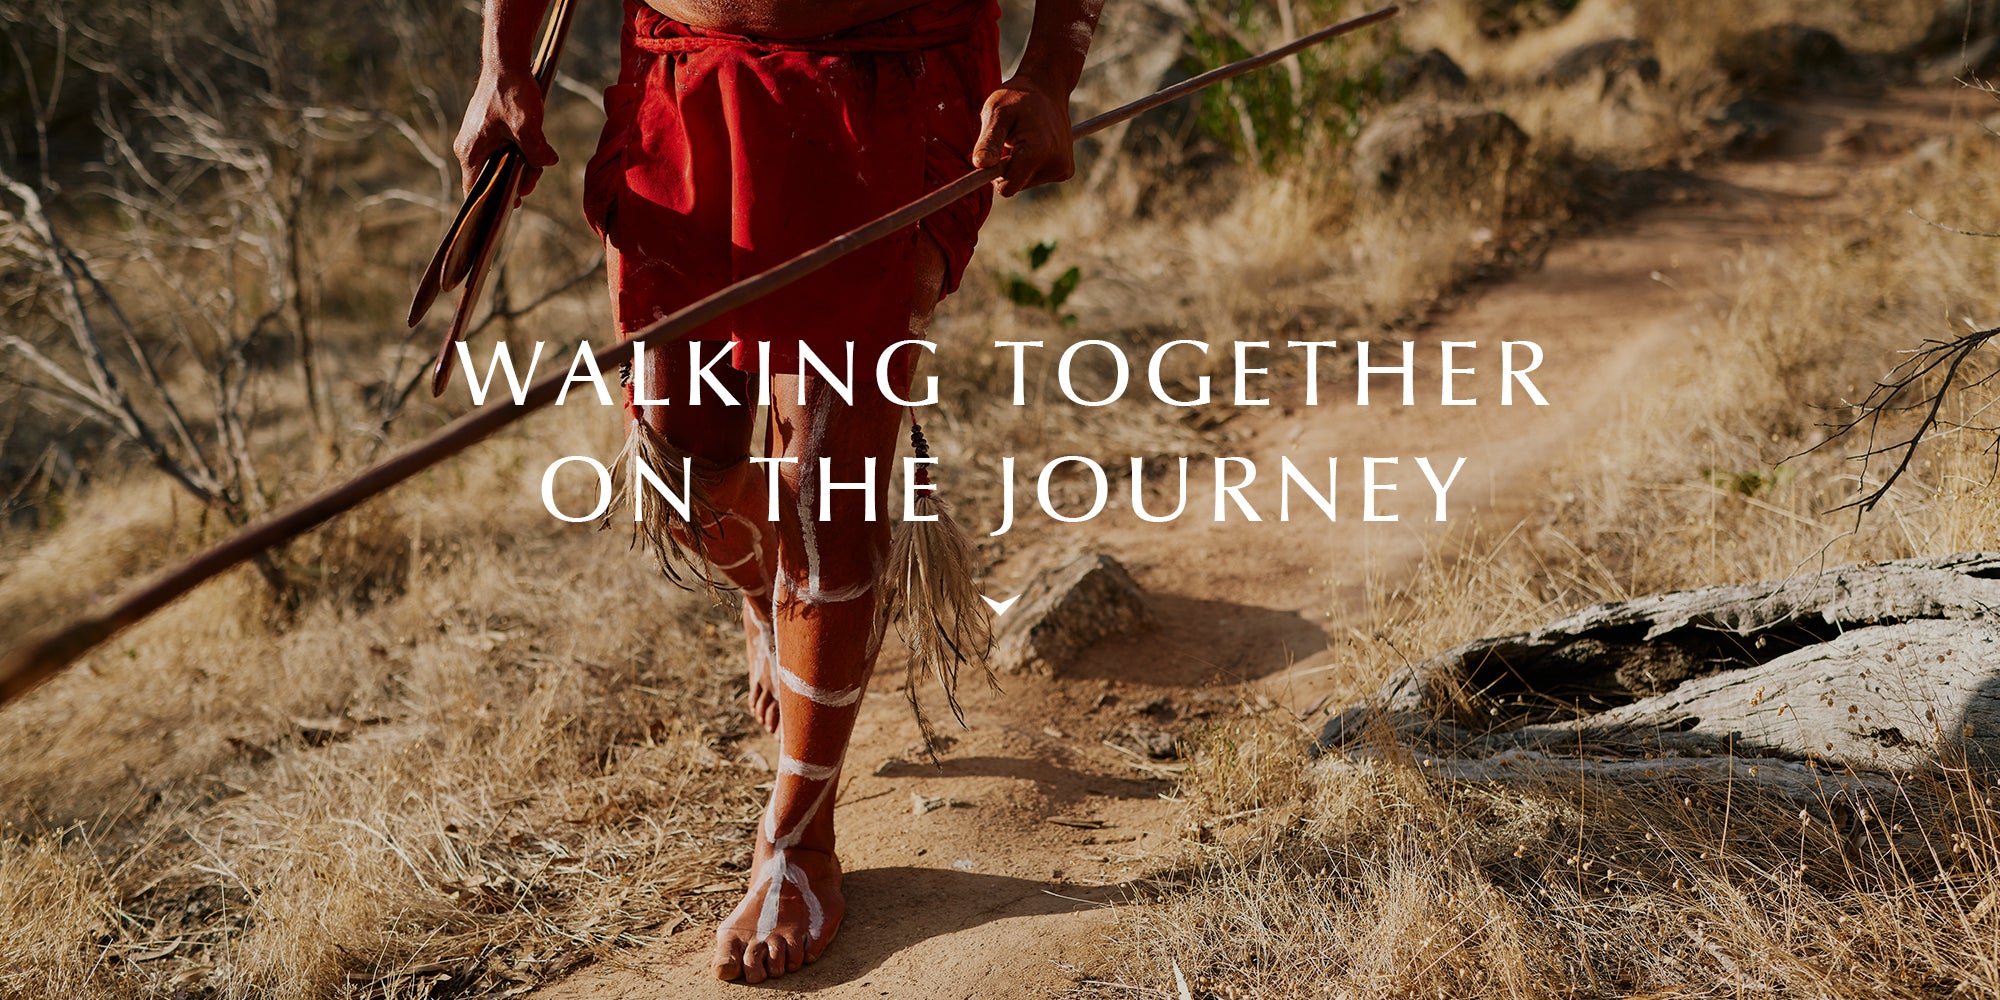 Walking Together on the Journey